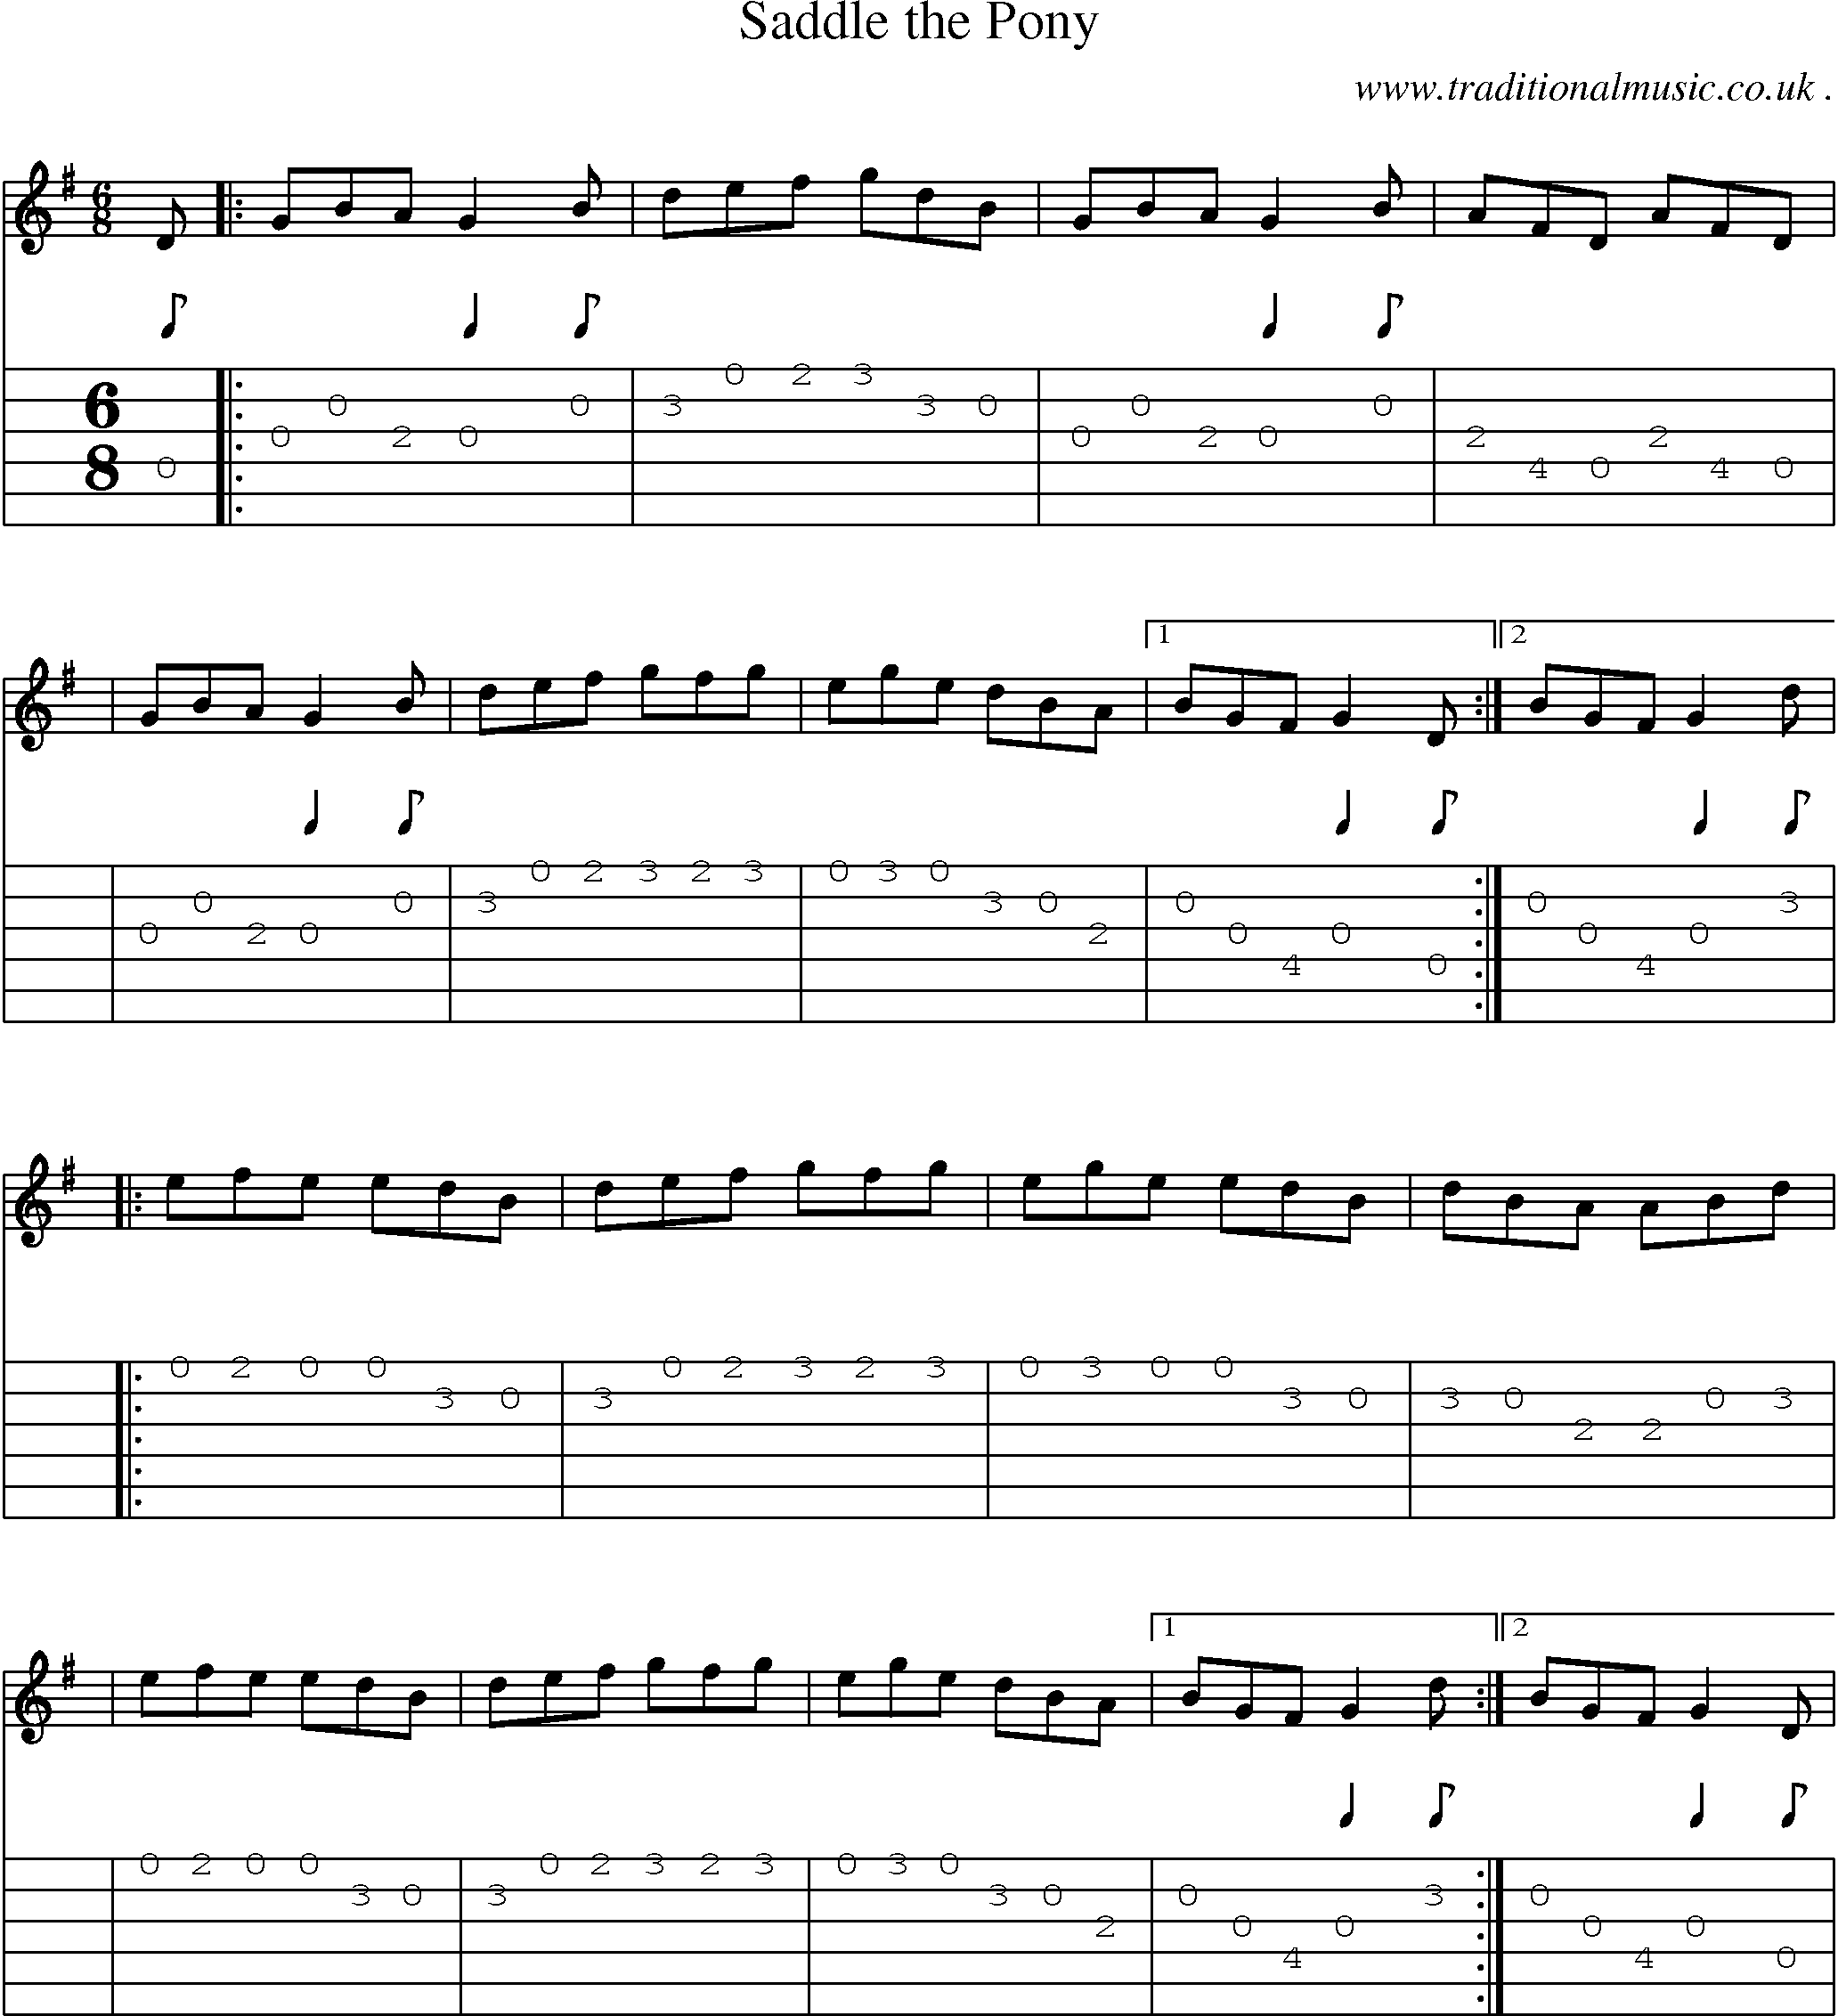 Sheet-Music and Guitar Tabs for Saddle The Pony